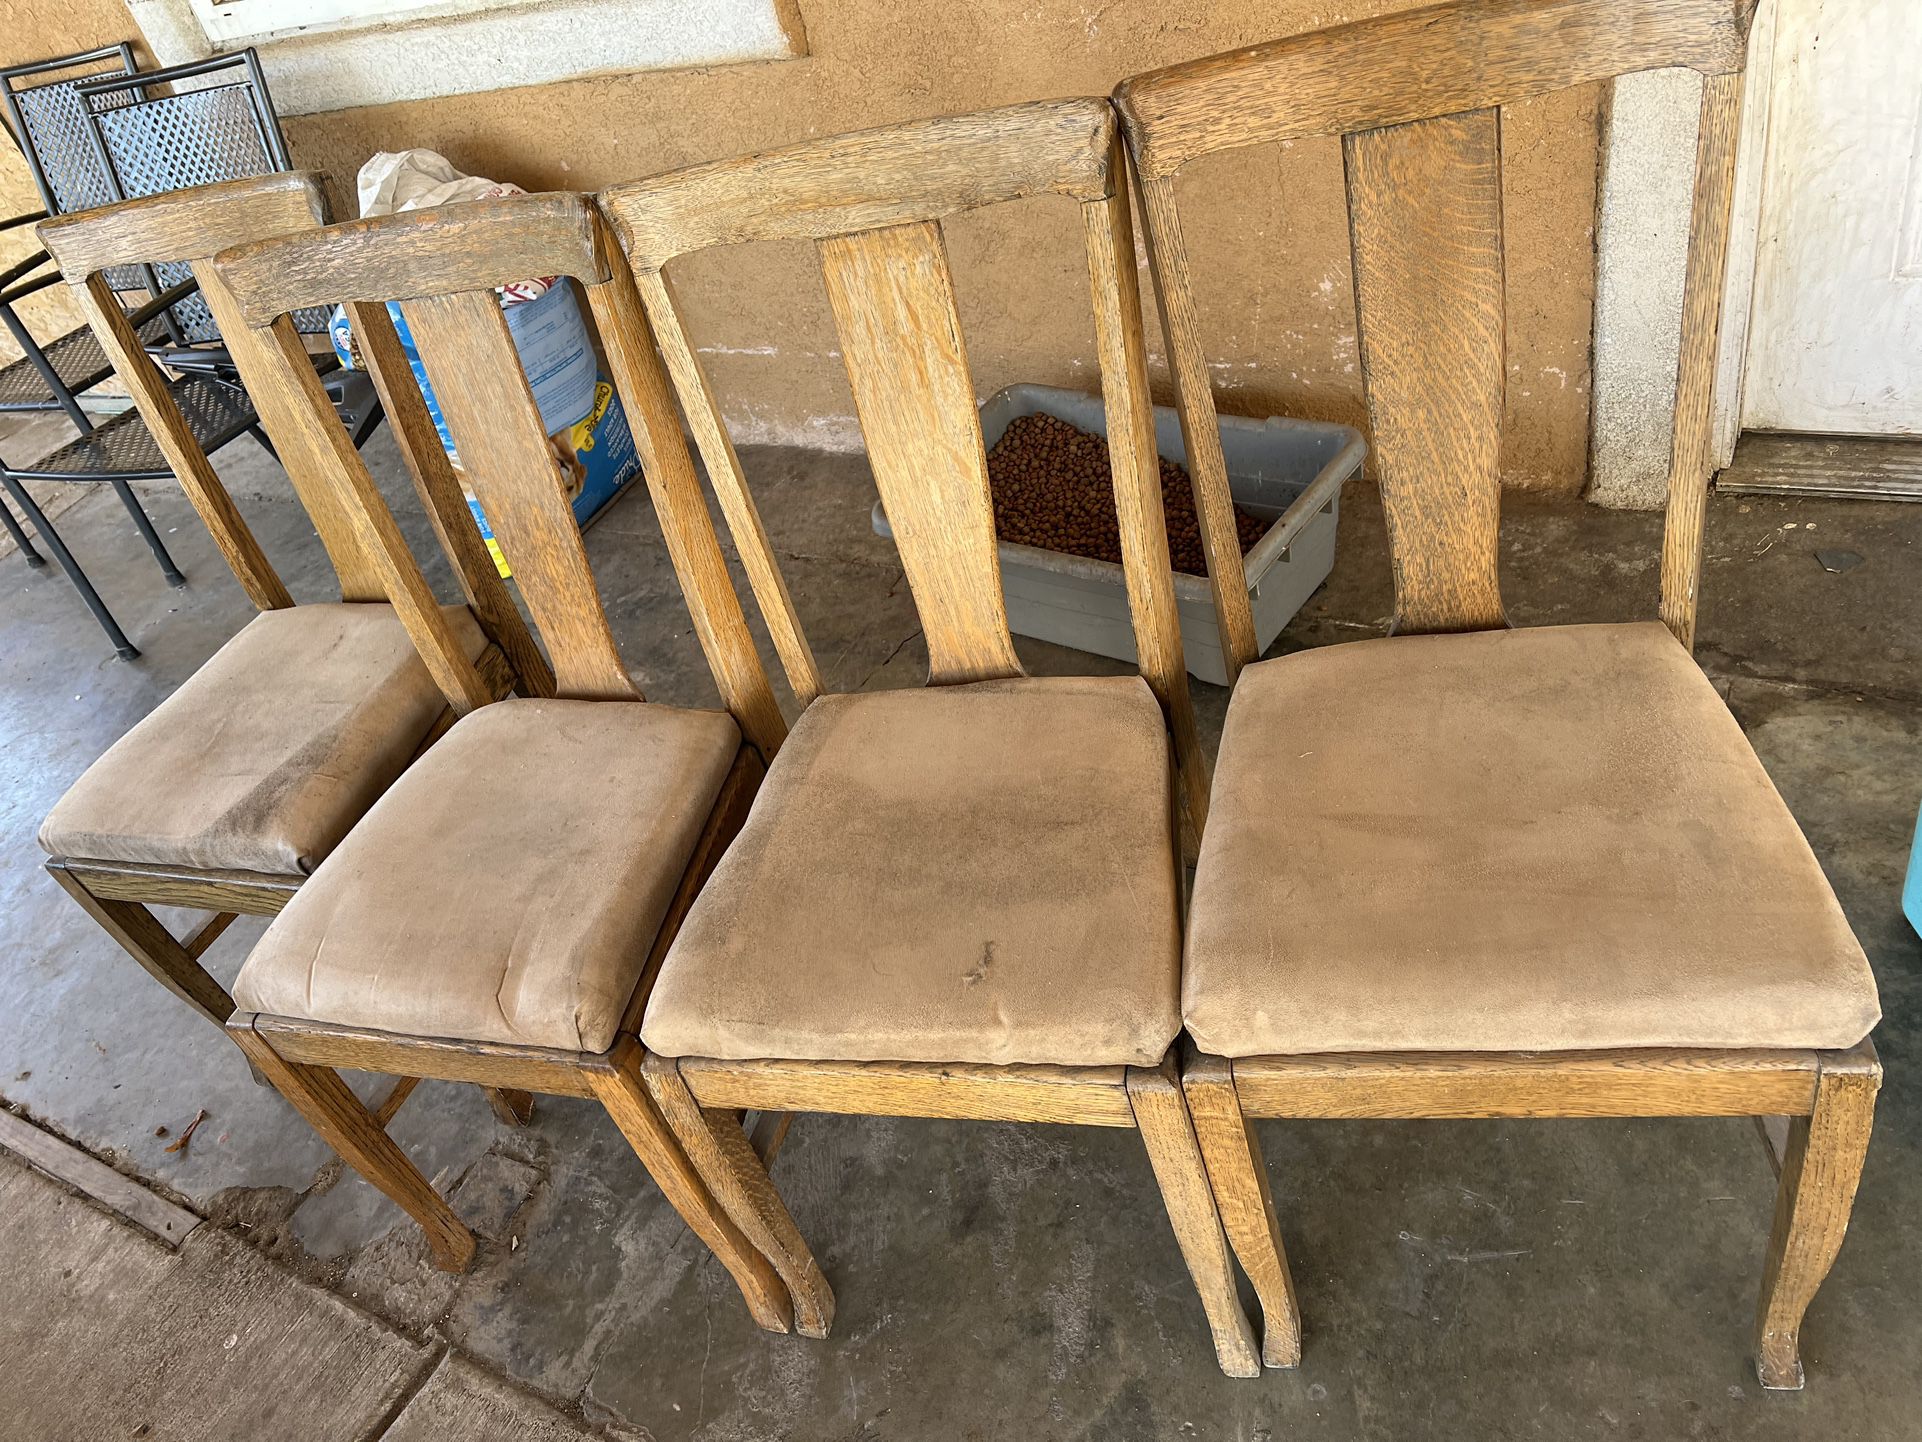 Free Chairs 